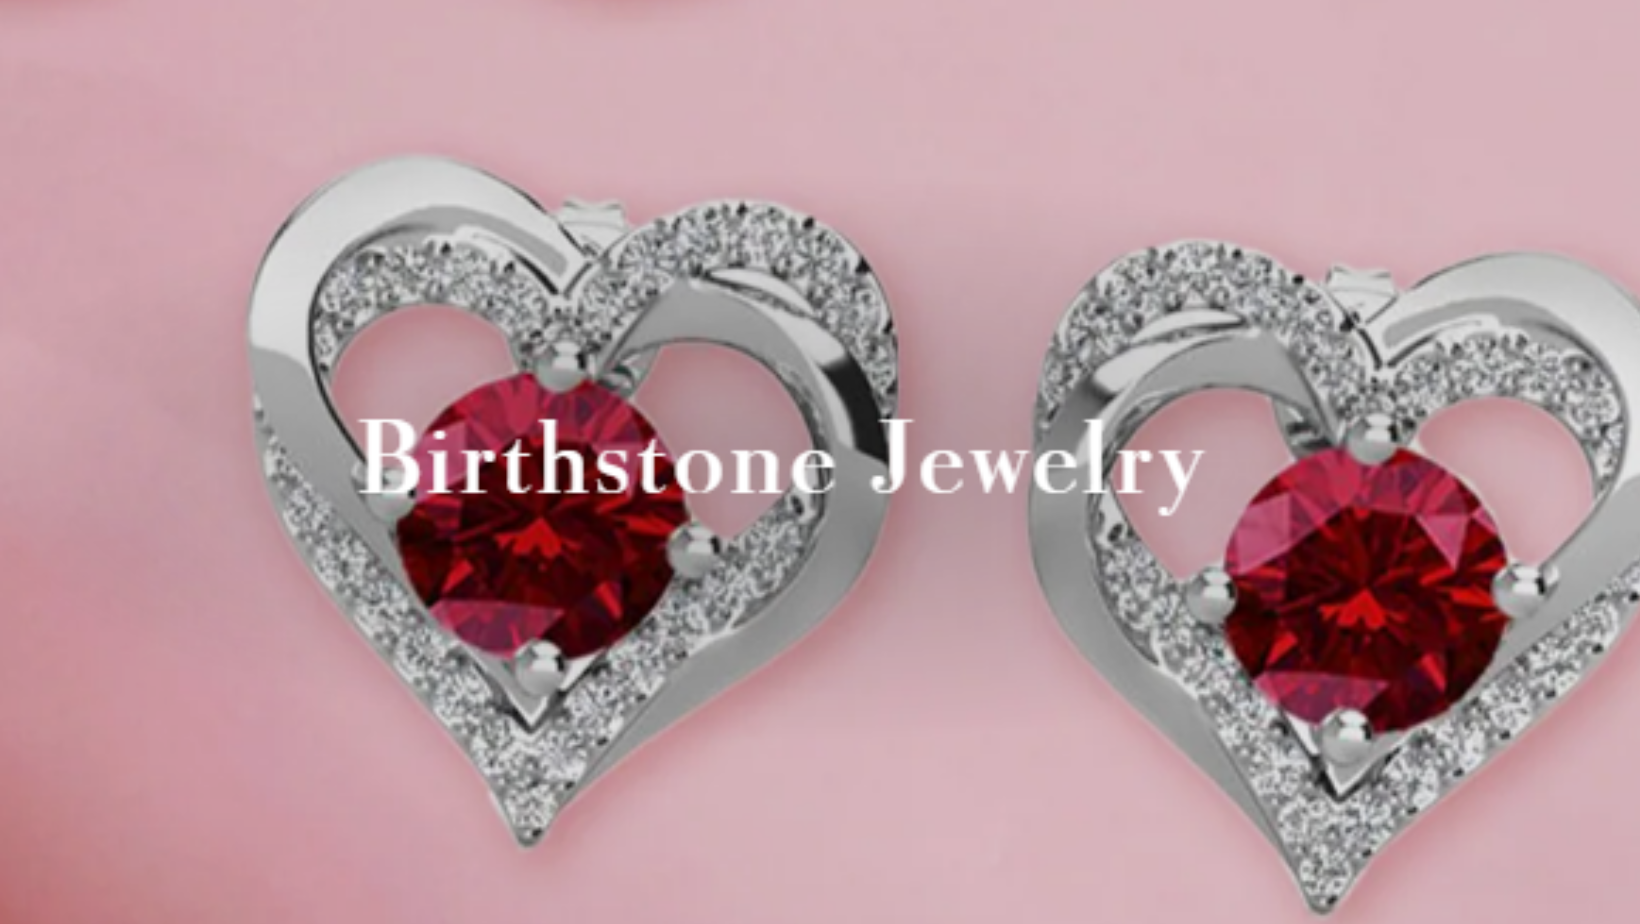 Trend Alert: How to Incorporate Birthstone Jewelry into Your Everyday Style